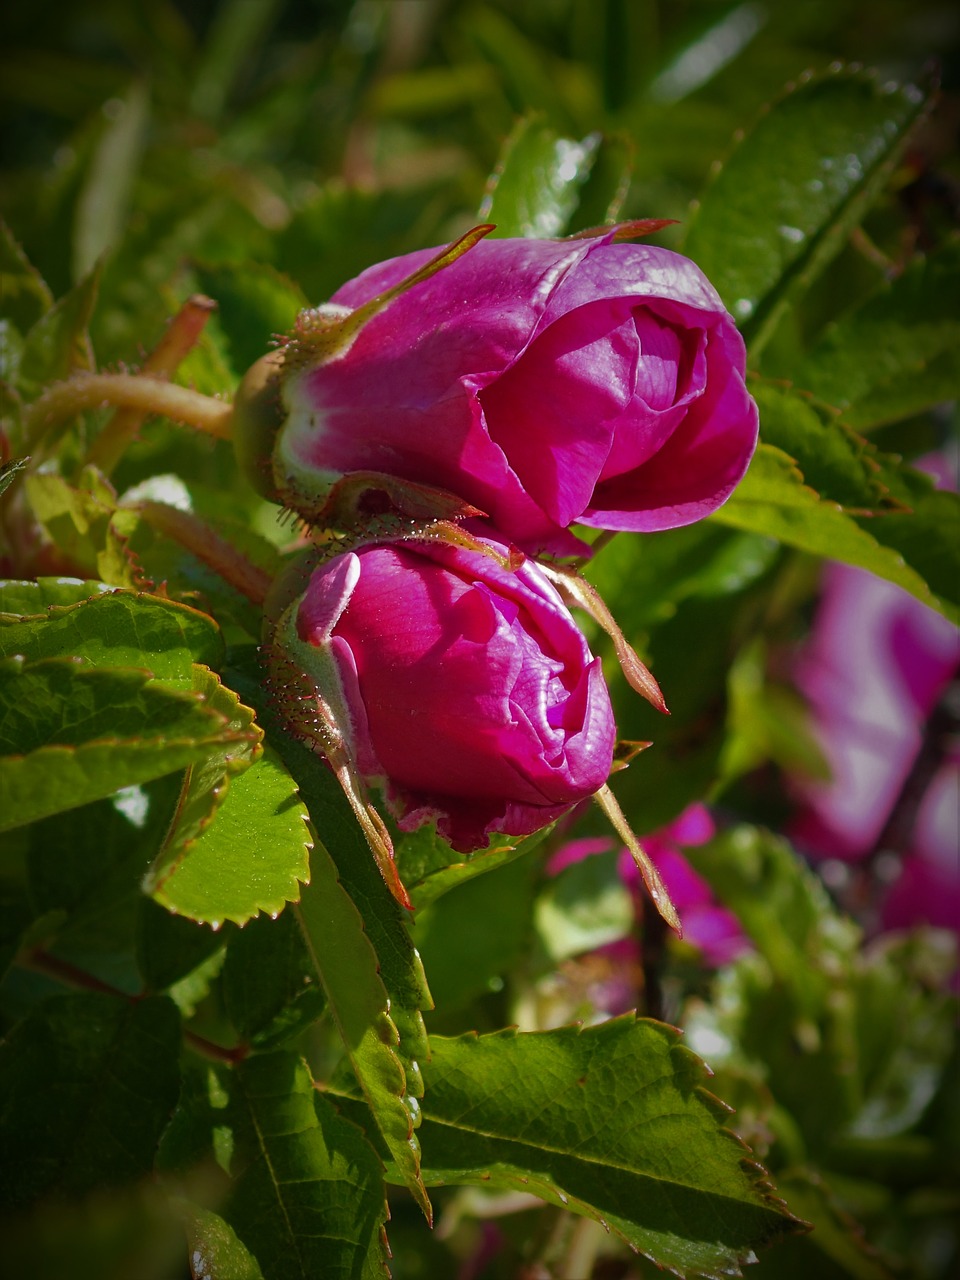 withered rose buds opens free photo